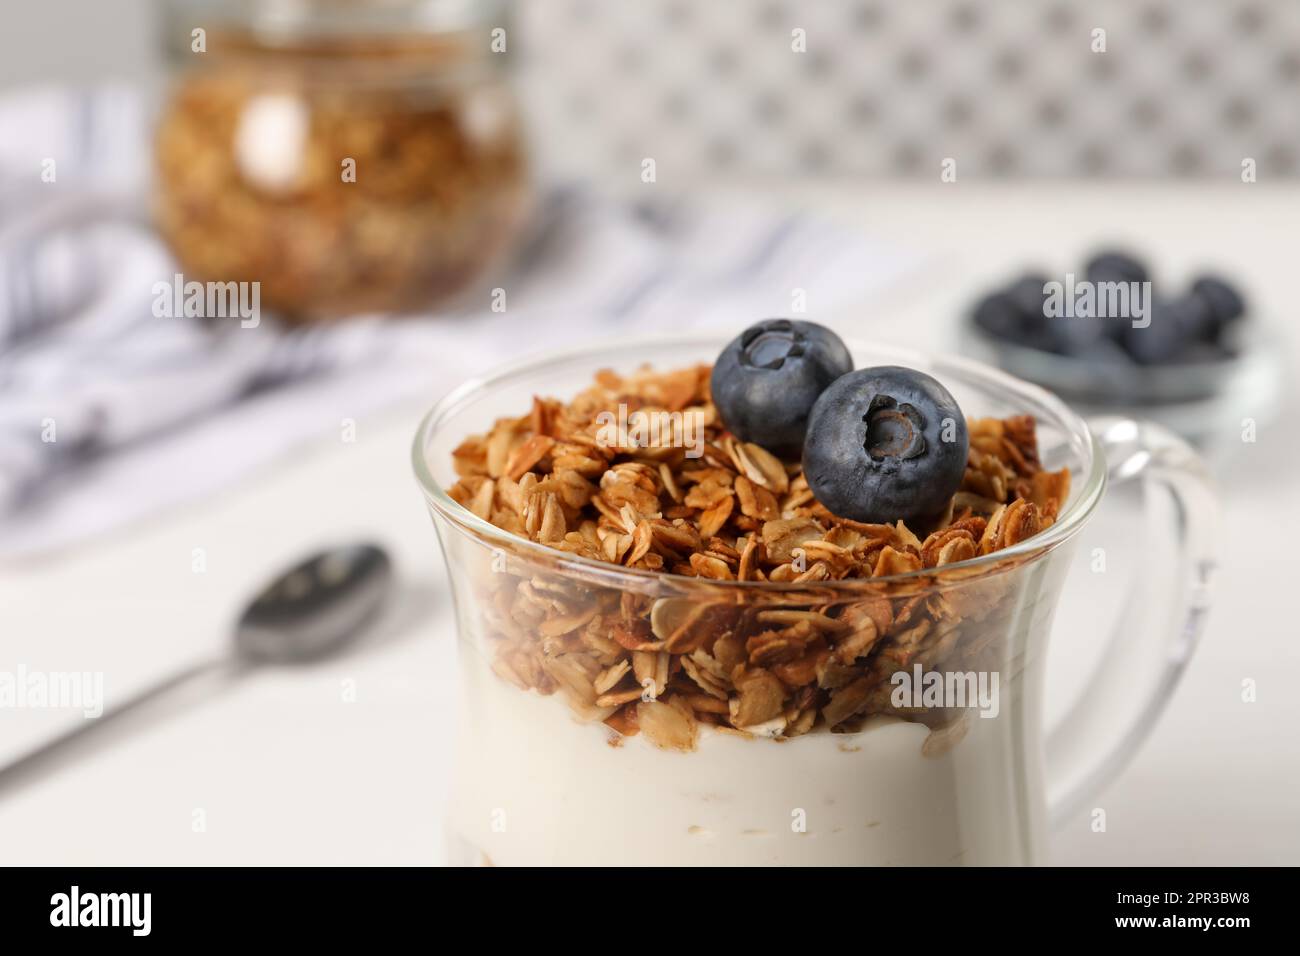 Tasty yogurt with muesli and blueberries in cup served on white table, closeup Stock Photo